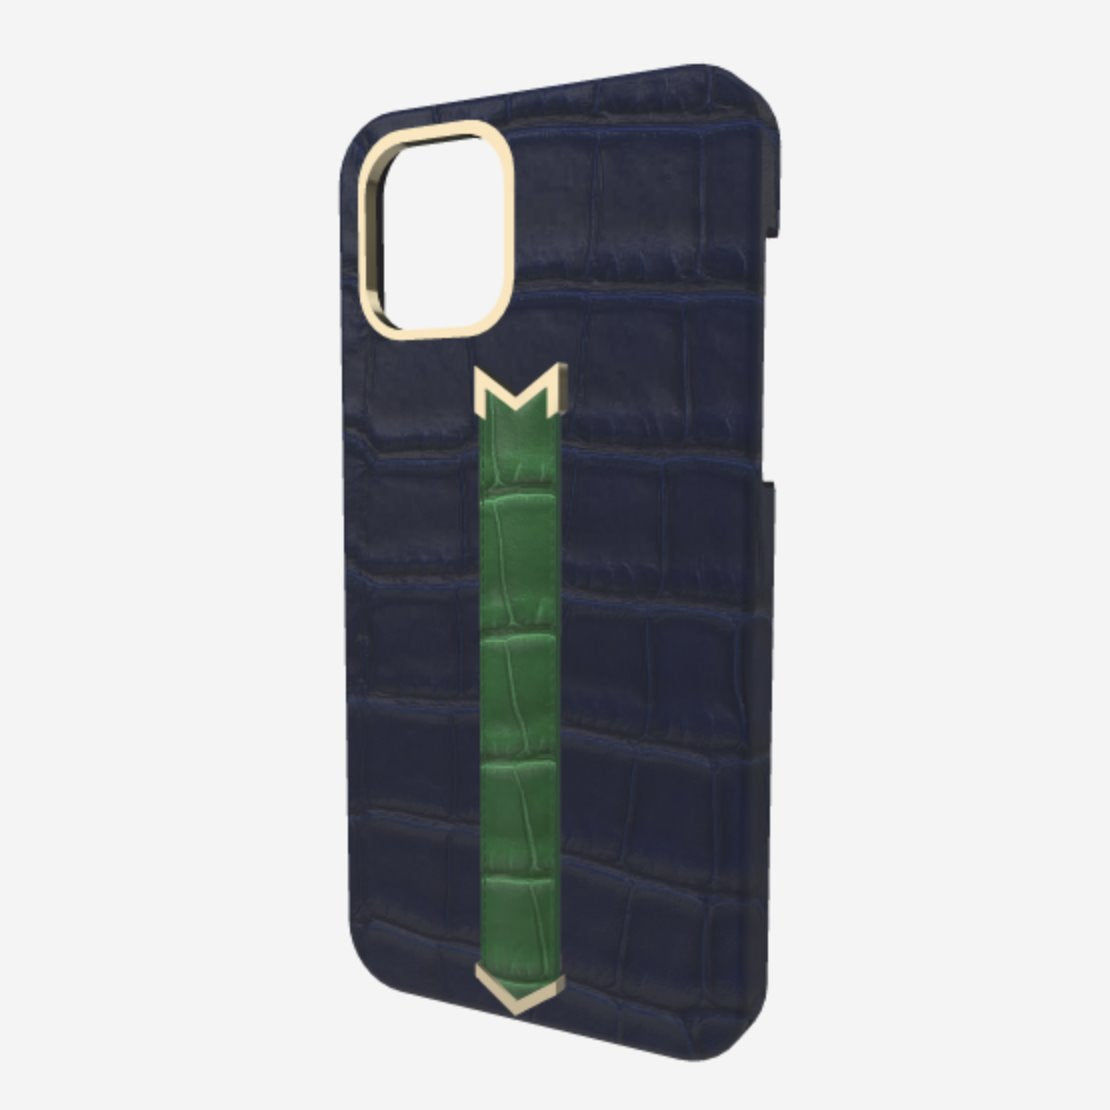 Gold Finger Strap Case for iPhone 13 Pro Max in Genuine Alligator Navy Blue Emerald Green 